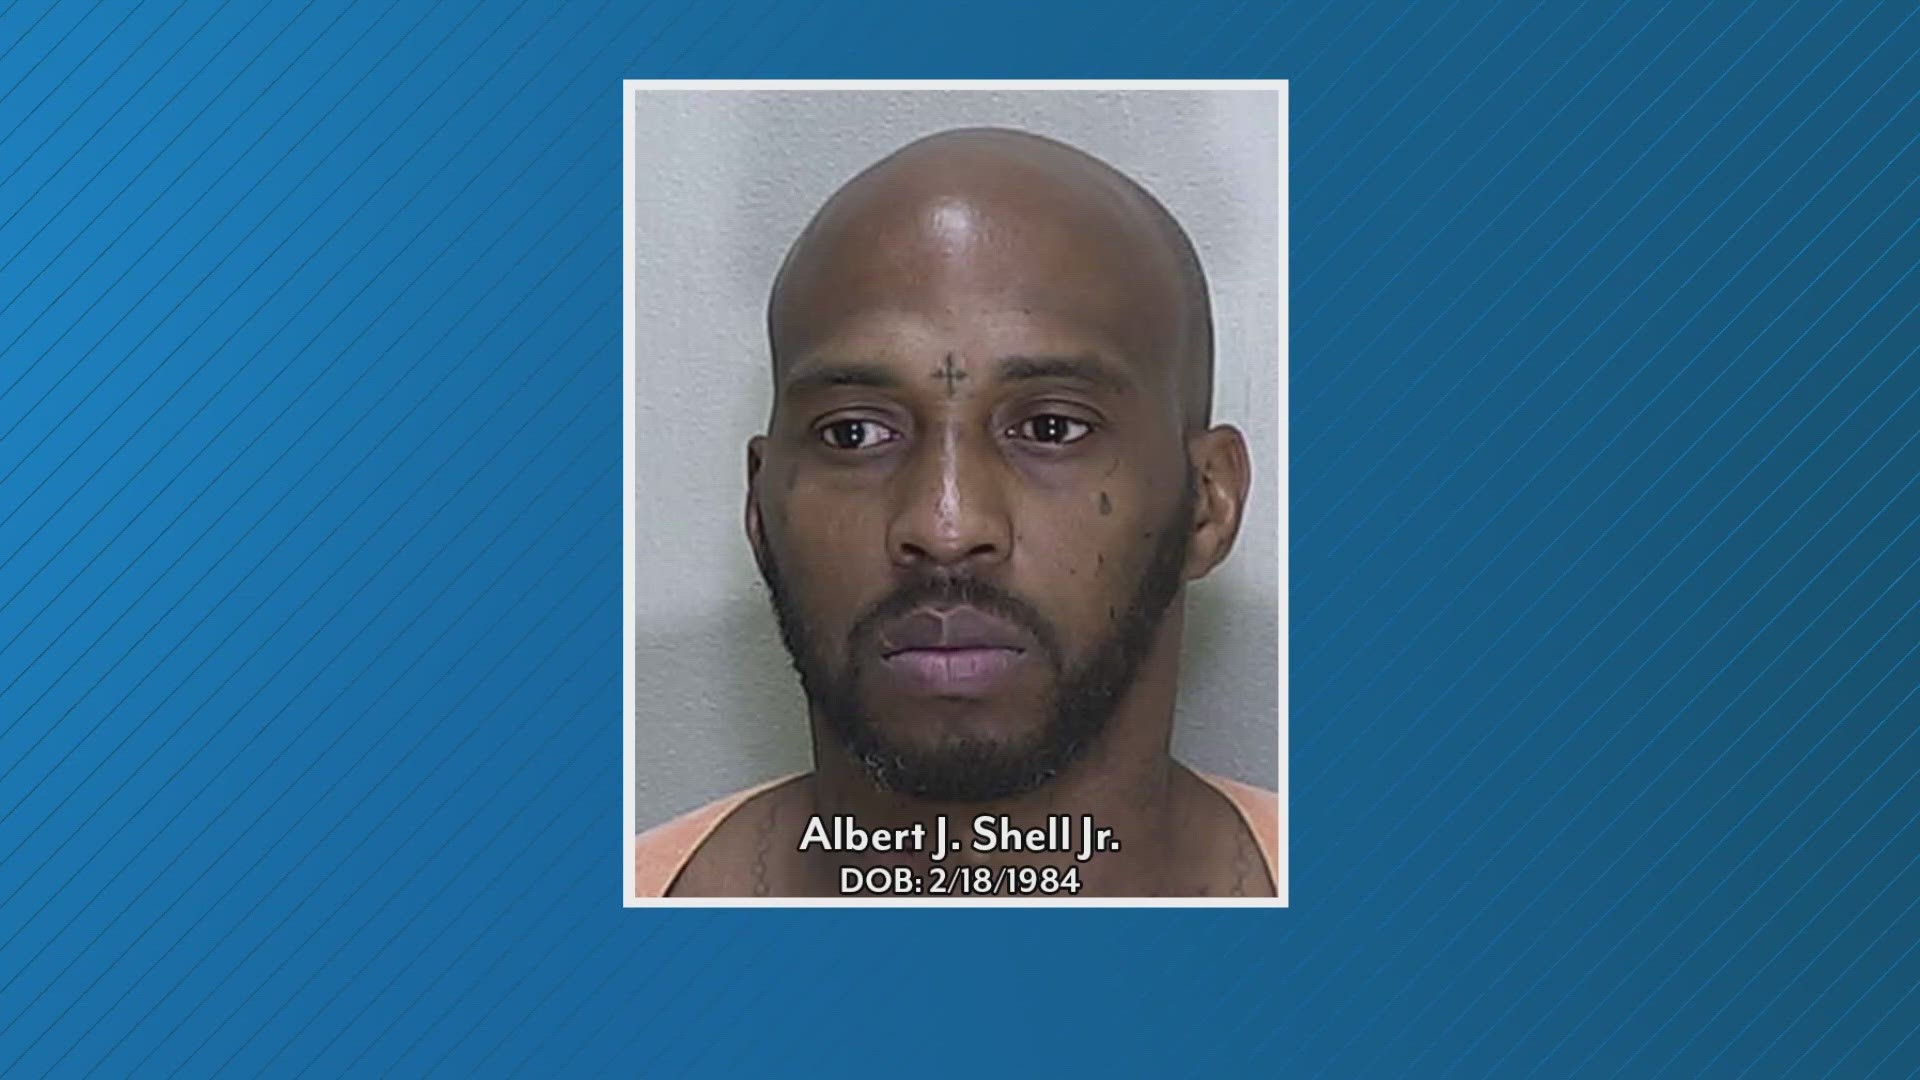 Albert Shell Jr. is the primary suspect of the Dec. 23 fatal shooting at Paddock Mall.